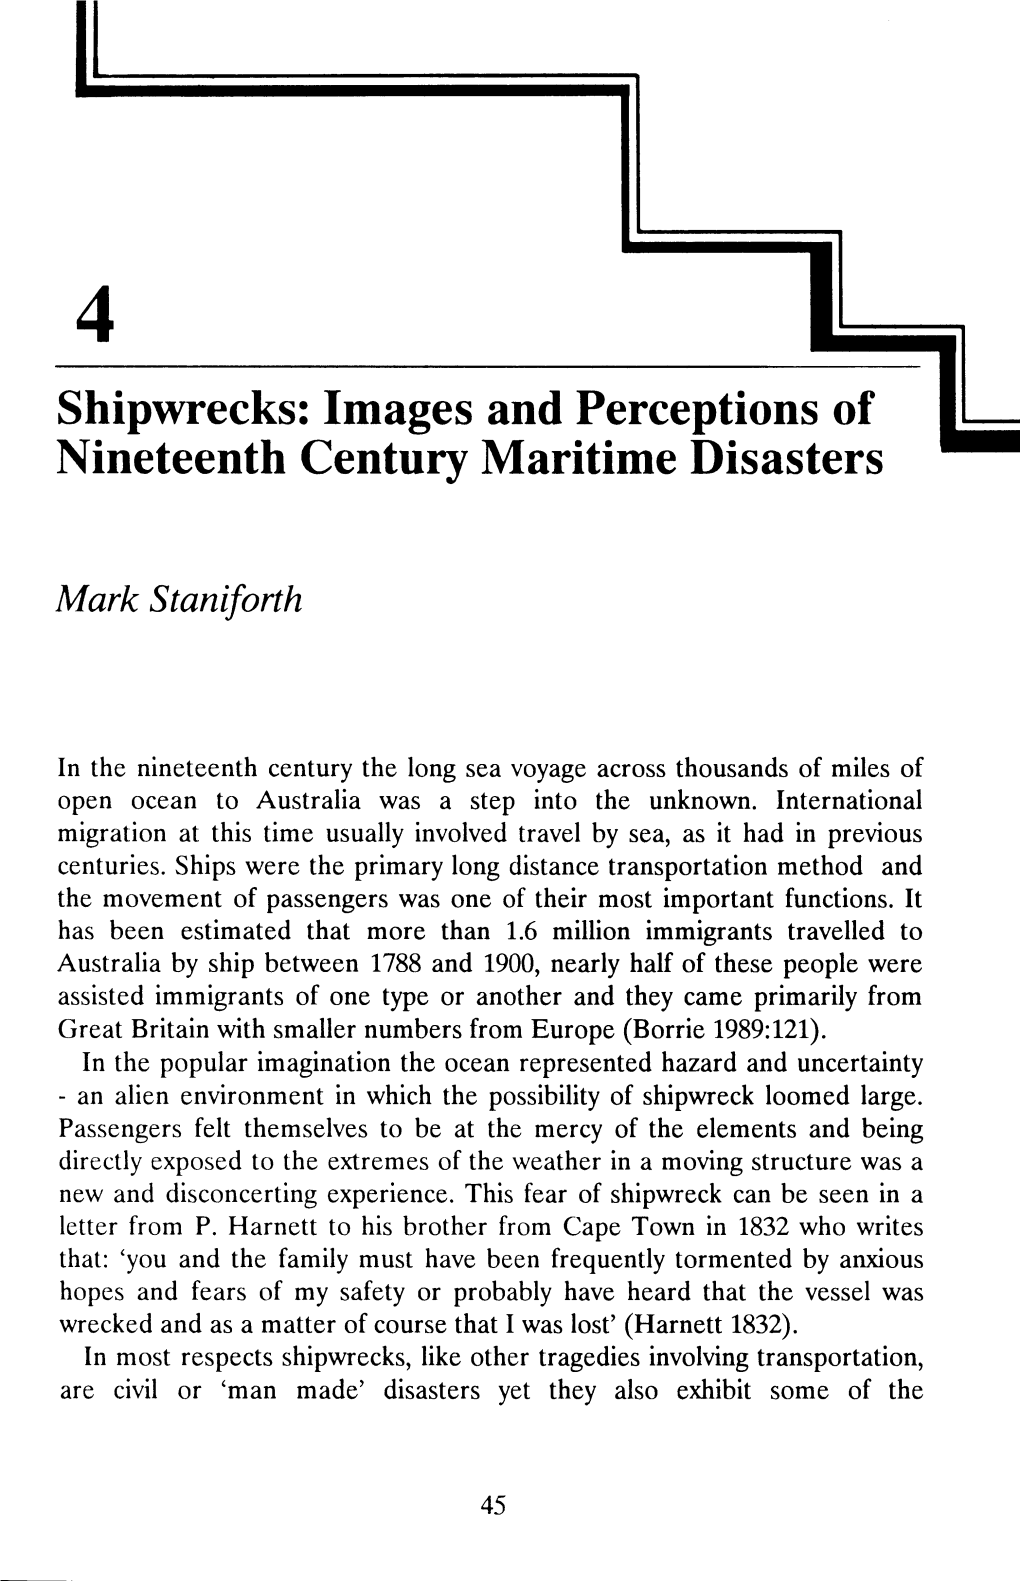 Shipwrecks: Images and Perceptions of Nineteenth Century Maritime Disasters